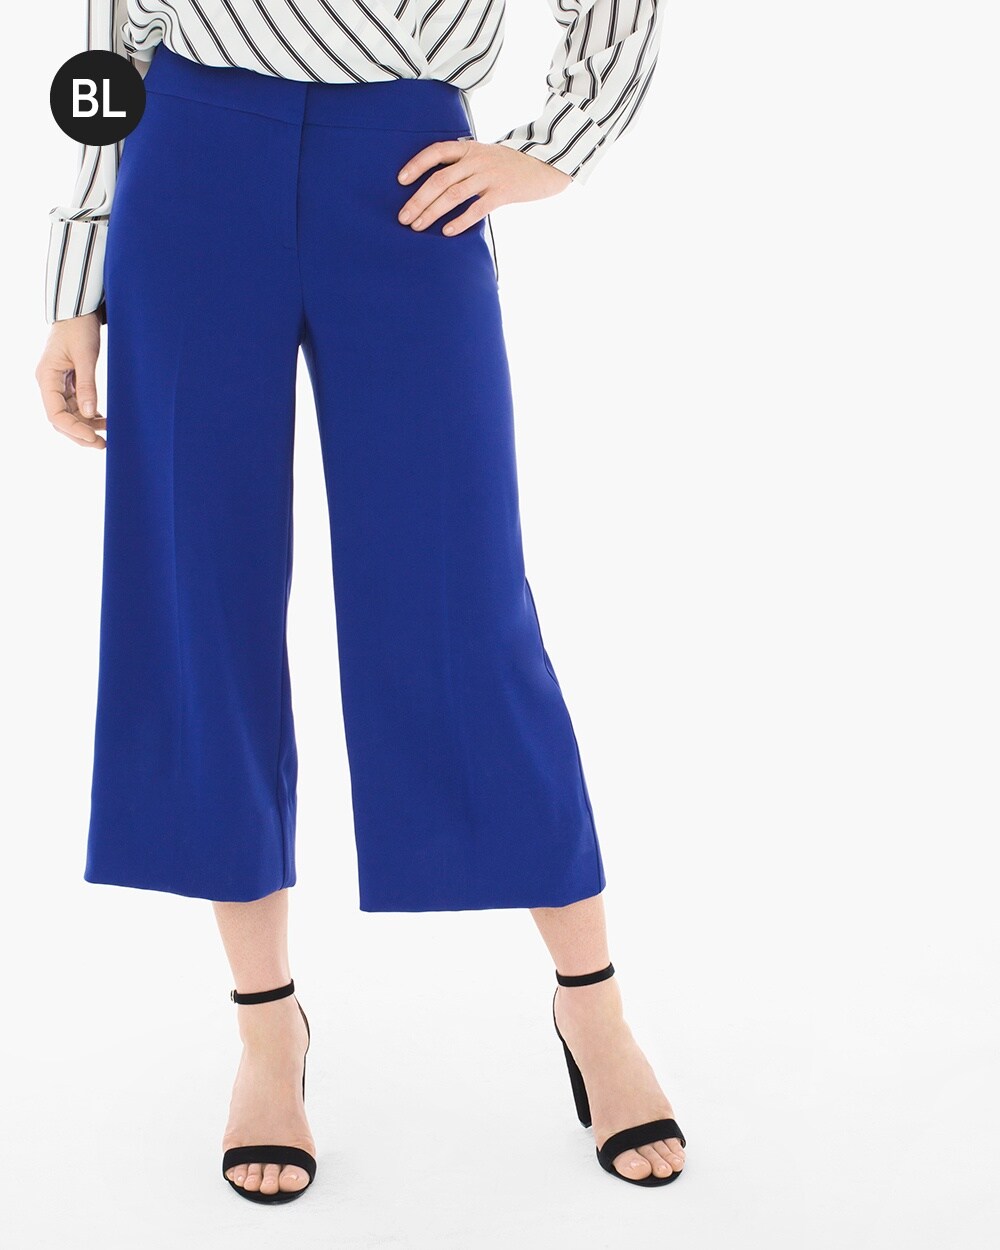 Black Label Cropped Trouser